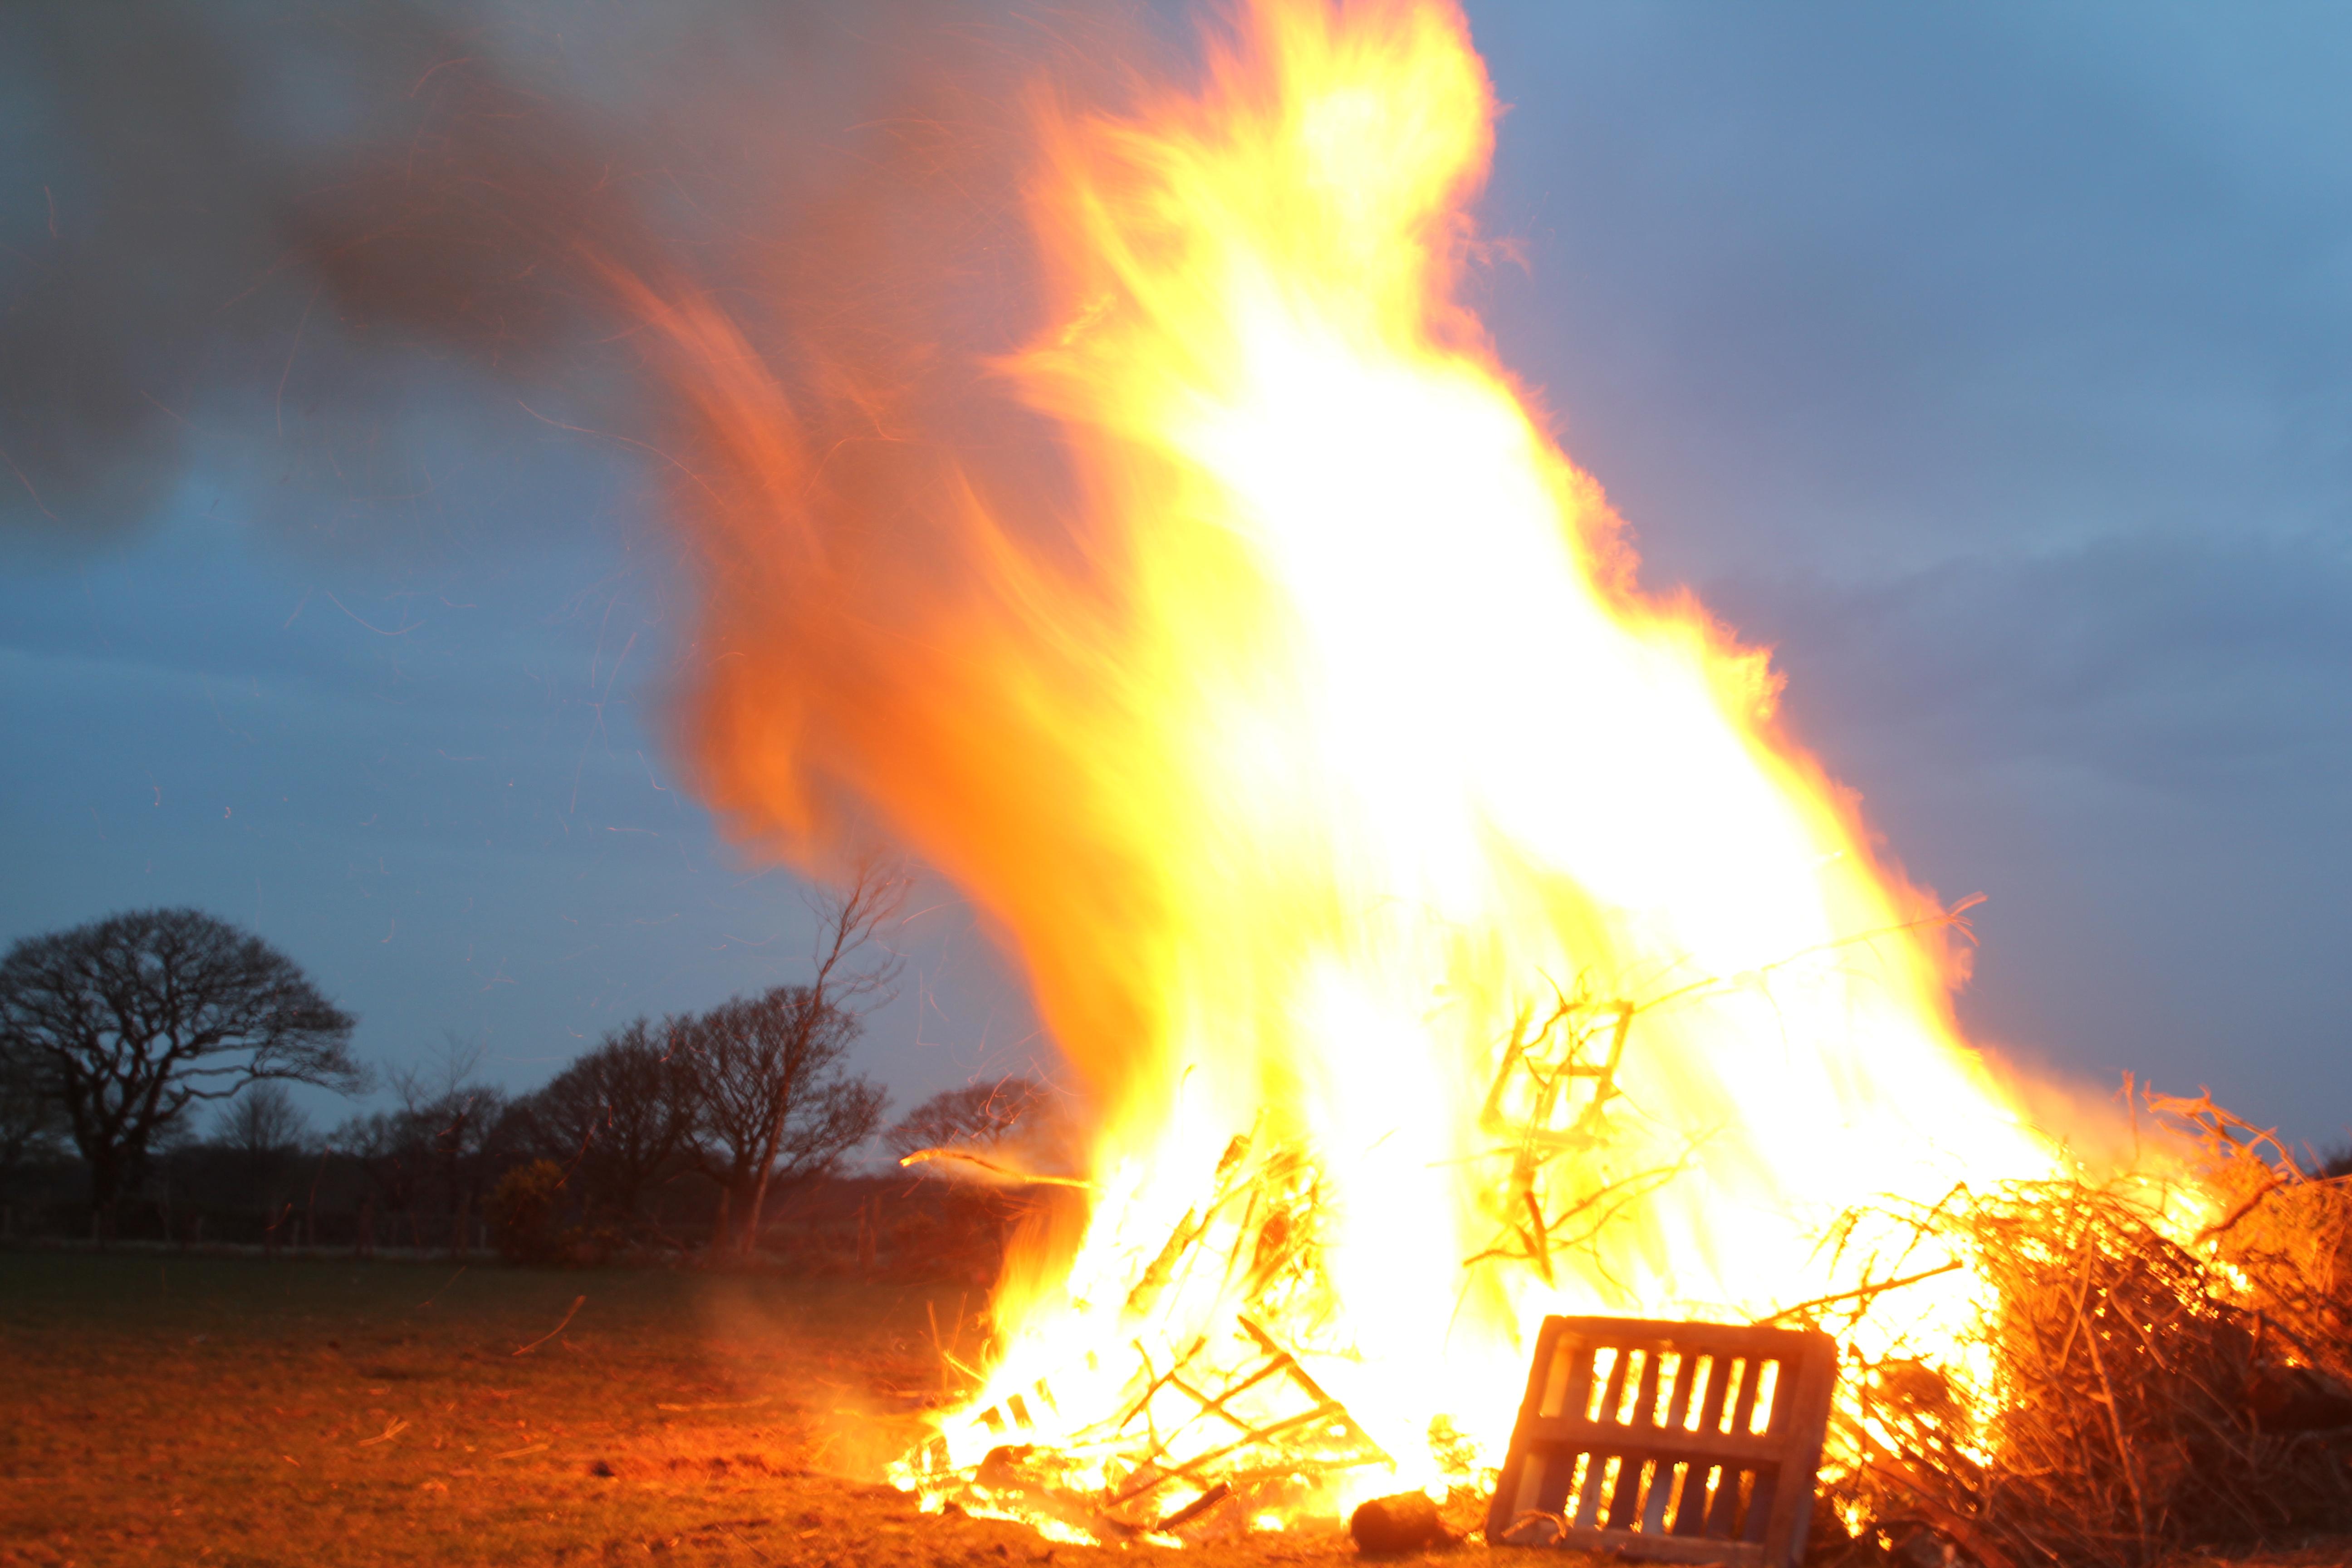 large bonfire including burning palettes and branches